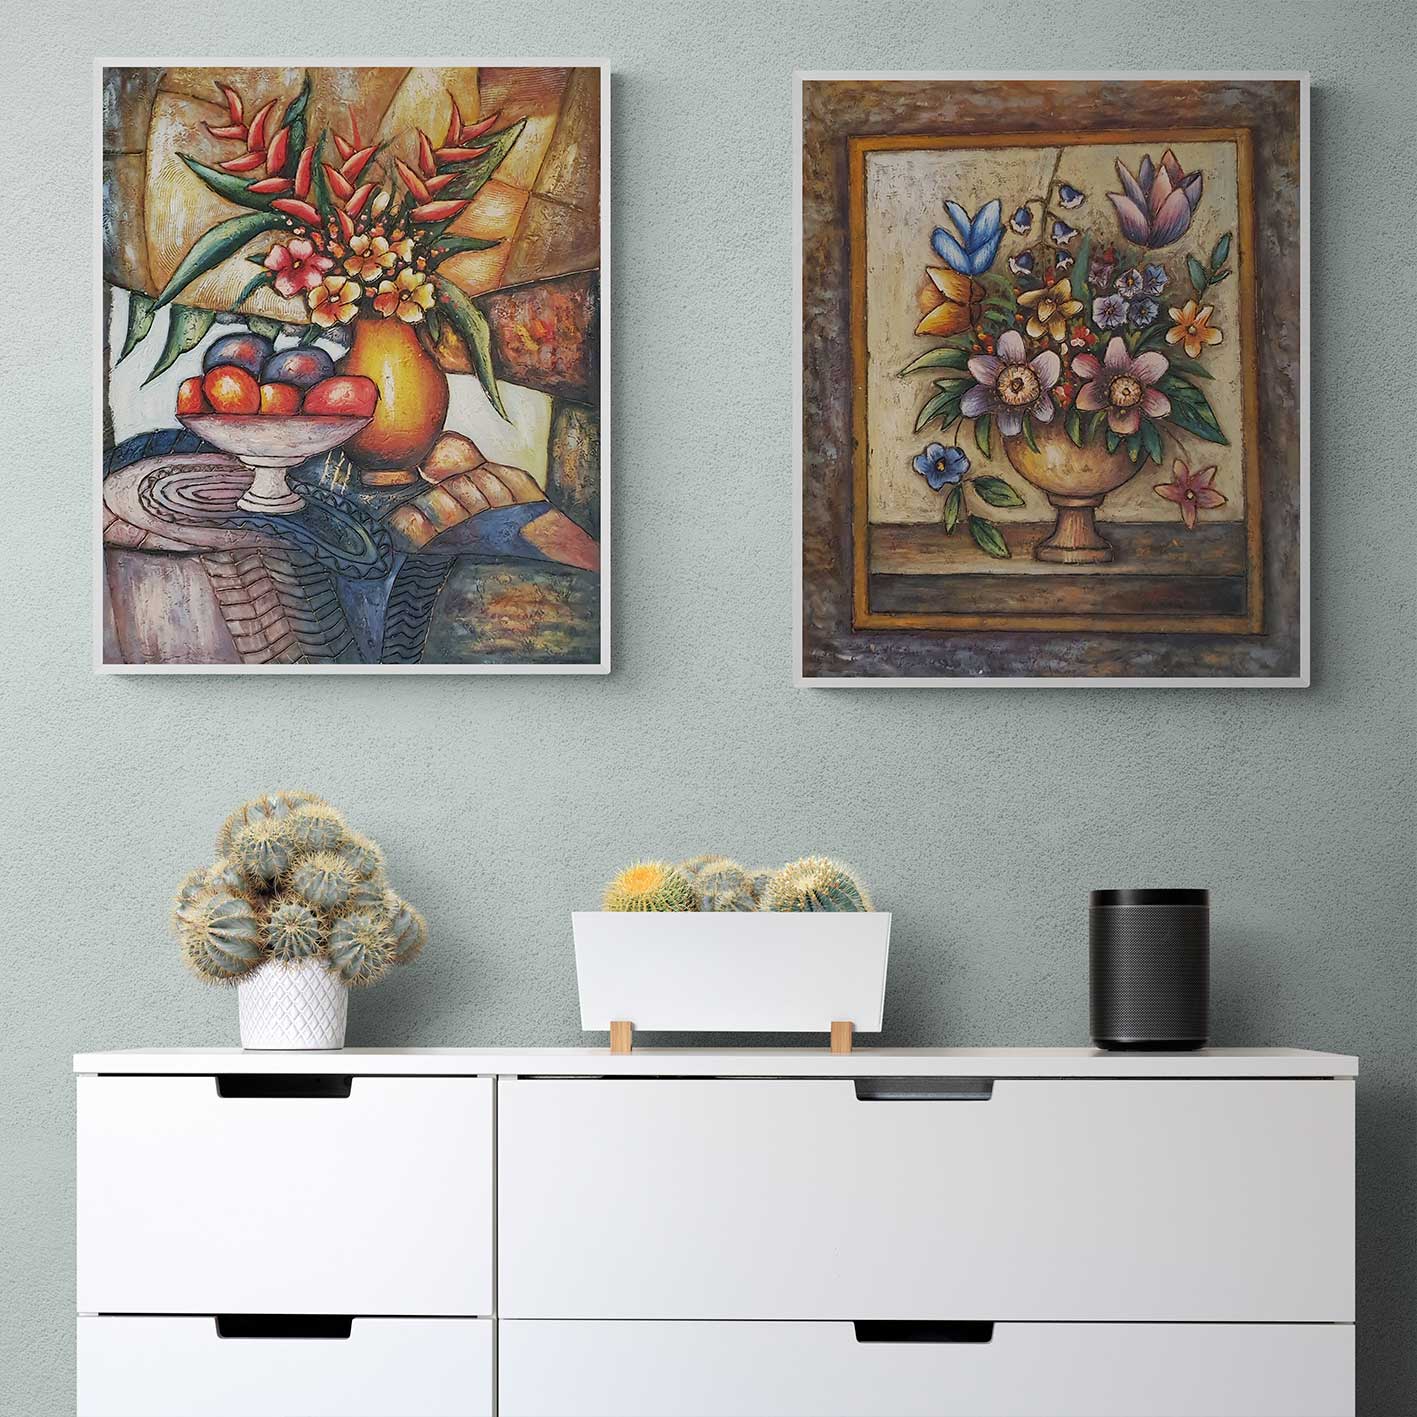 Star Still Life Diptych Painting 50x60 cm [2 pieces]